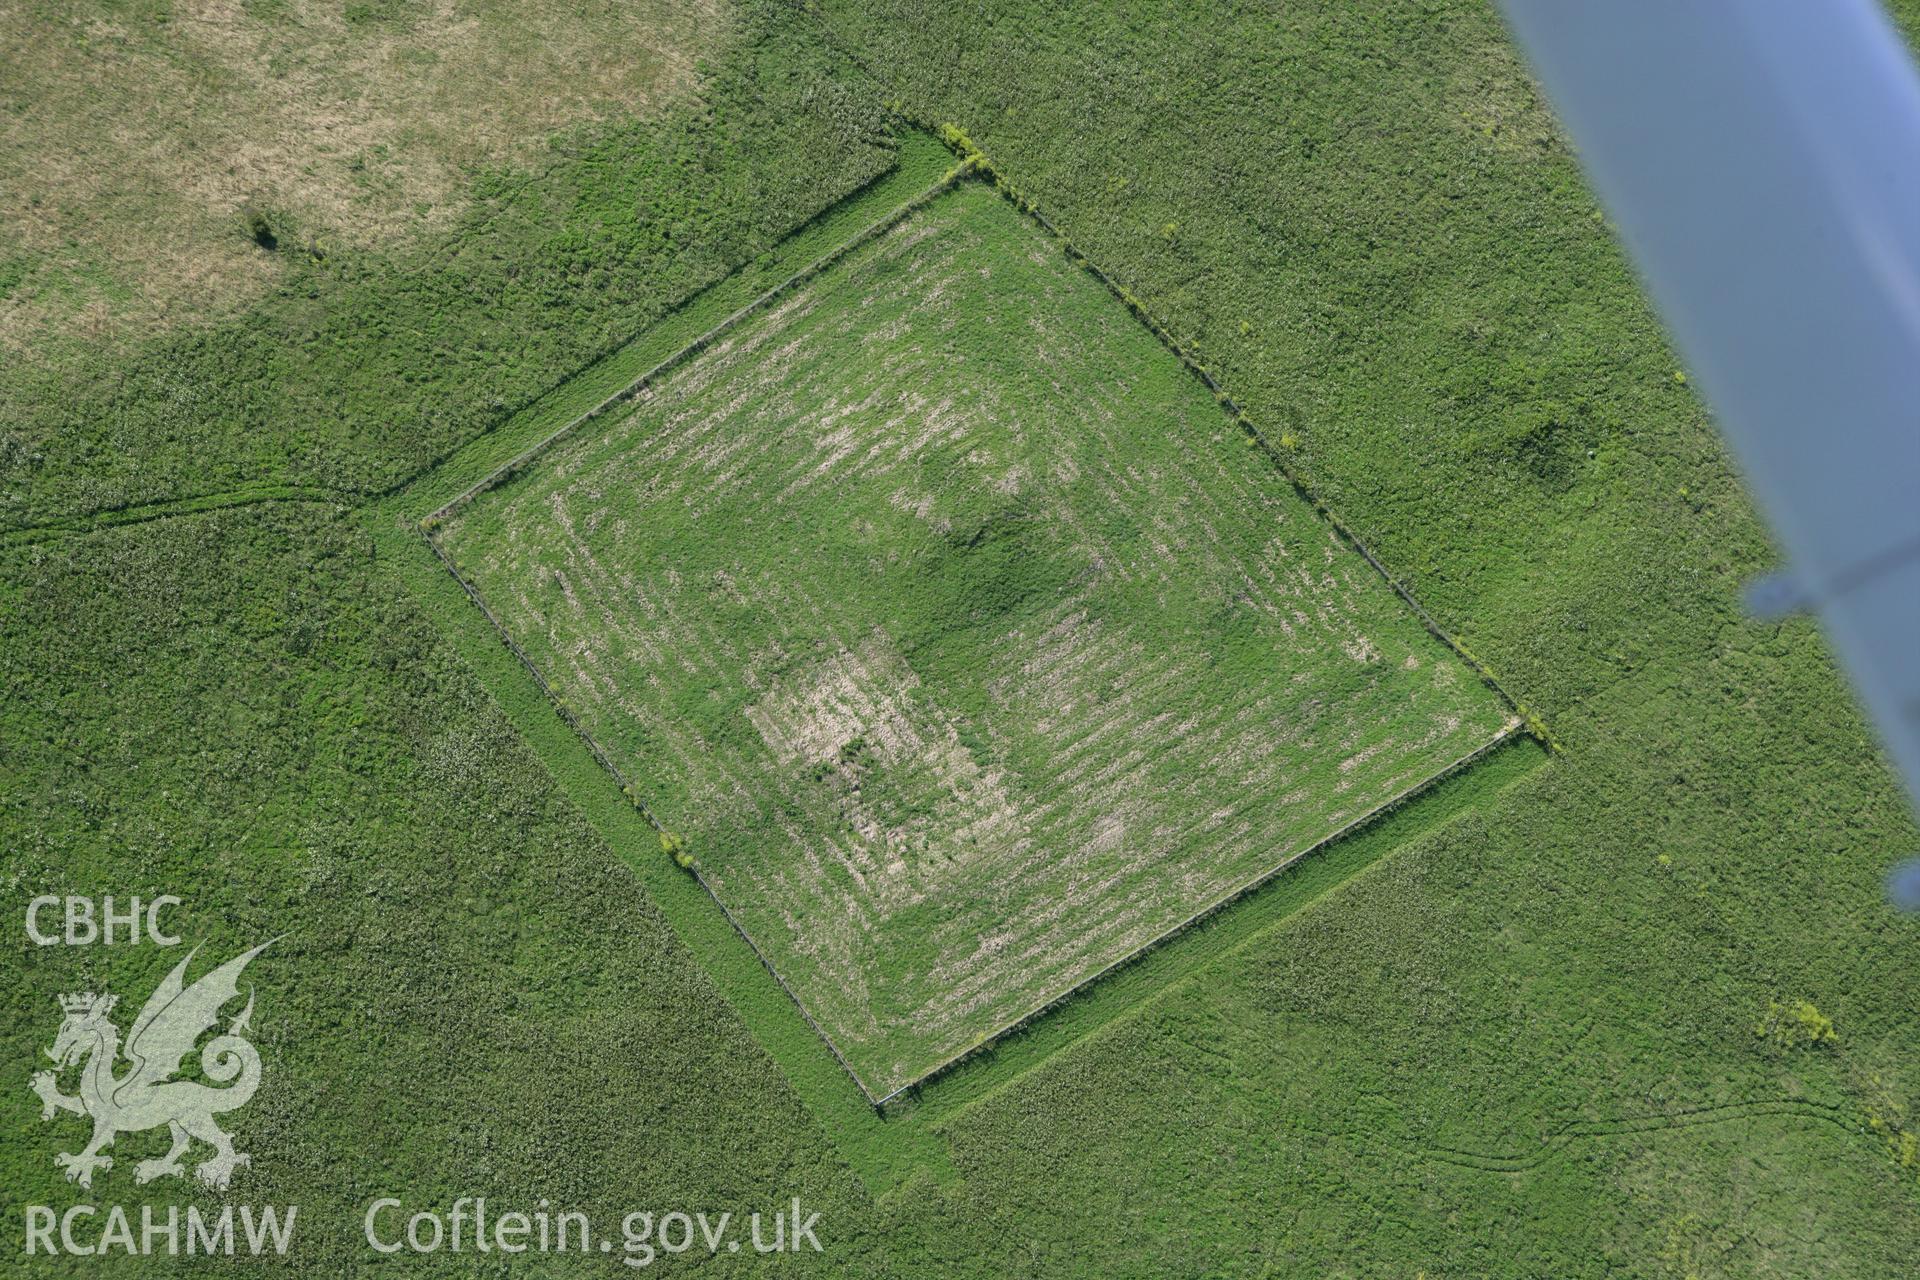 RCAHMW colour oblique aerial photograph of Brownslade Round Barrow, Castlemartin. Taken on 30 July 2007 by Toby Driver